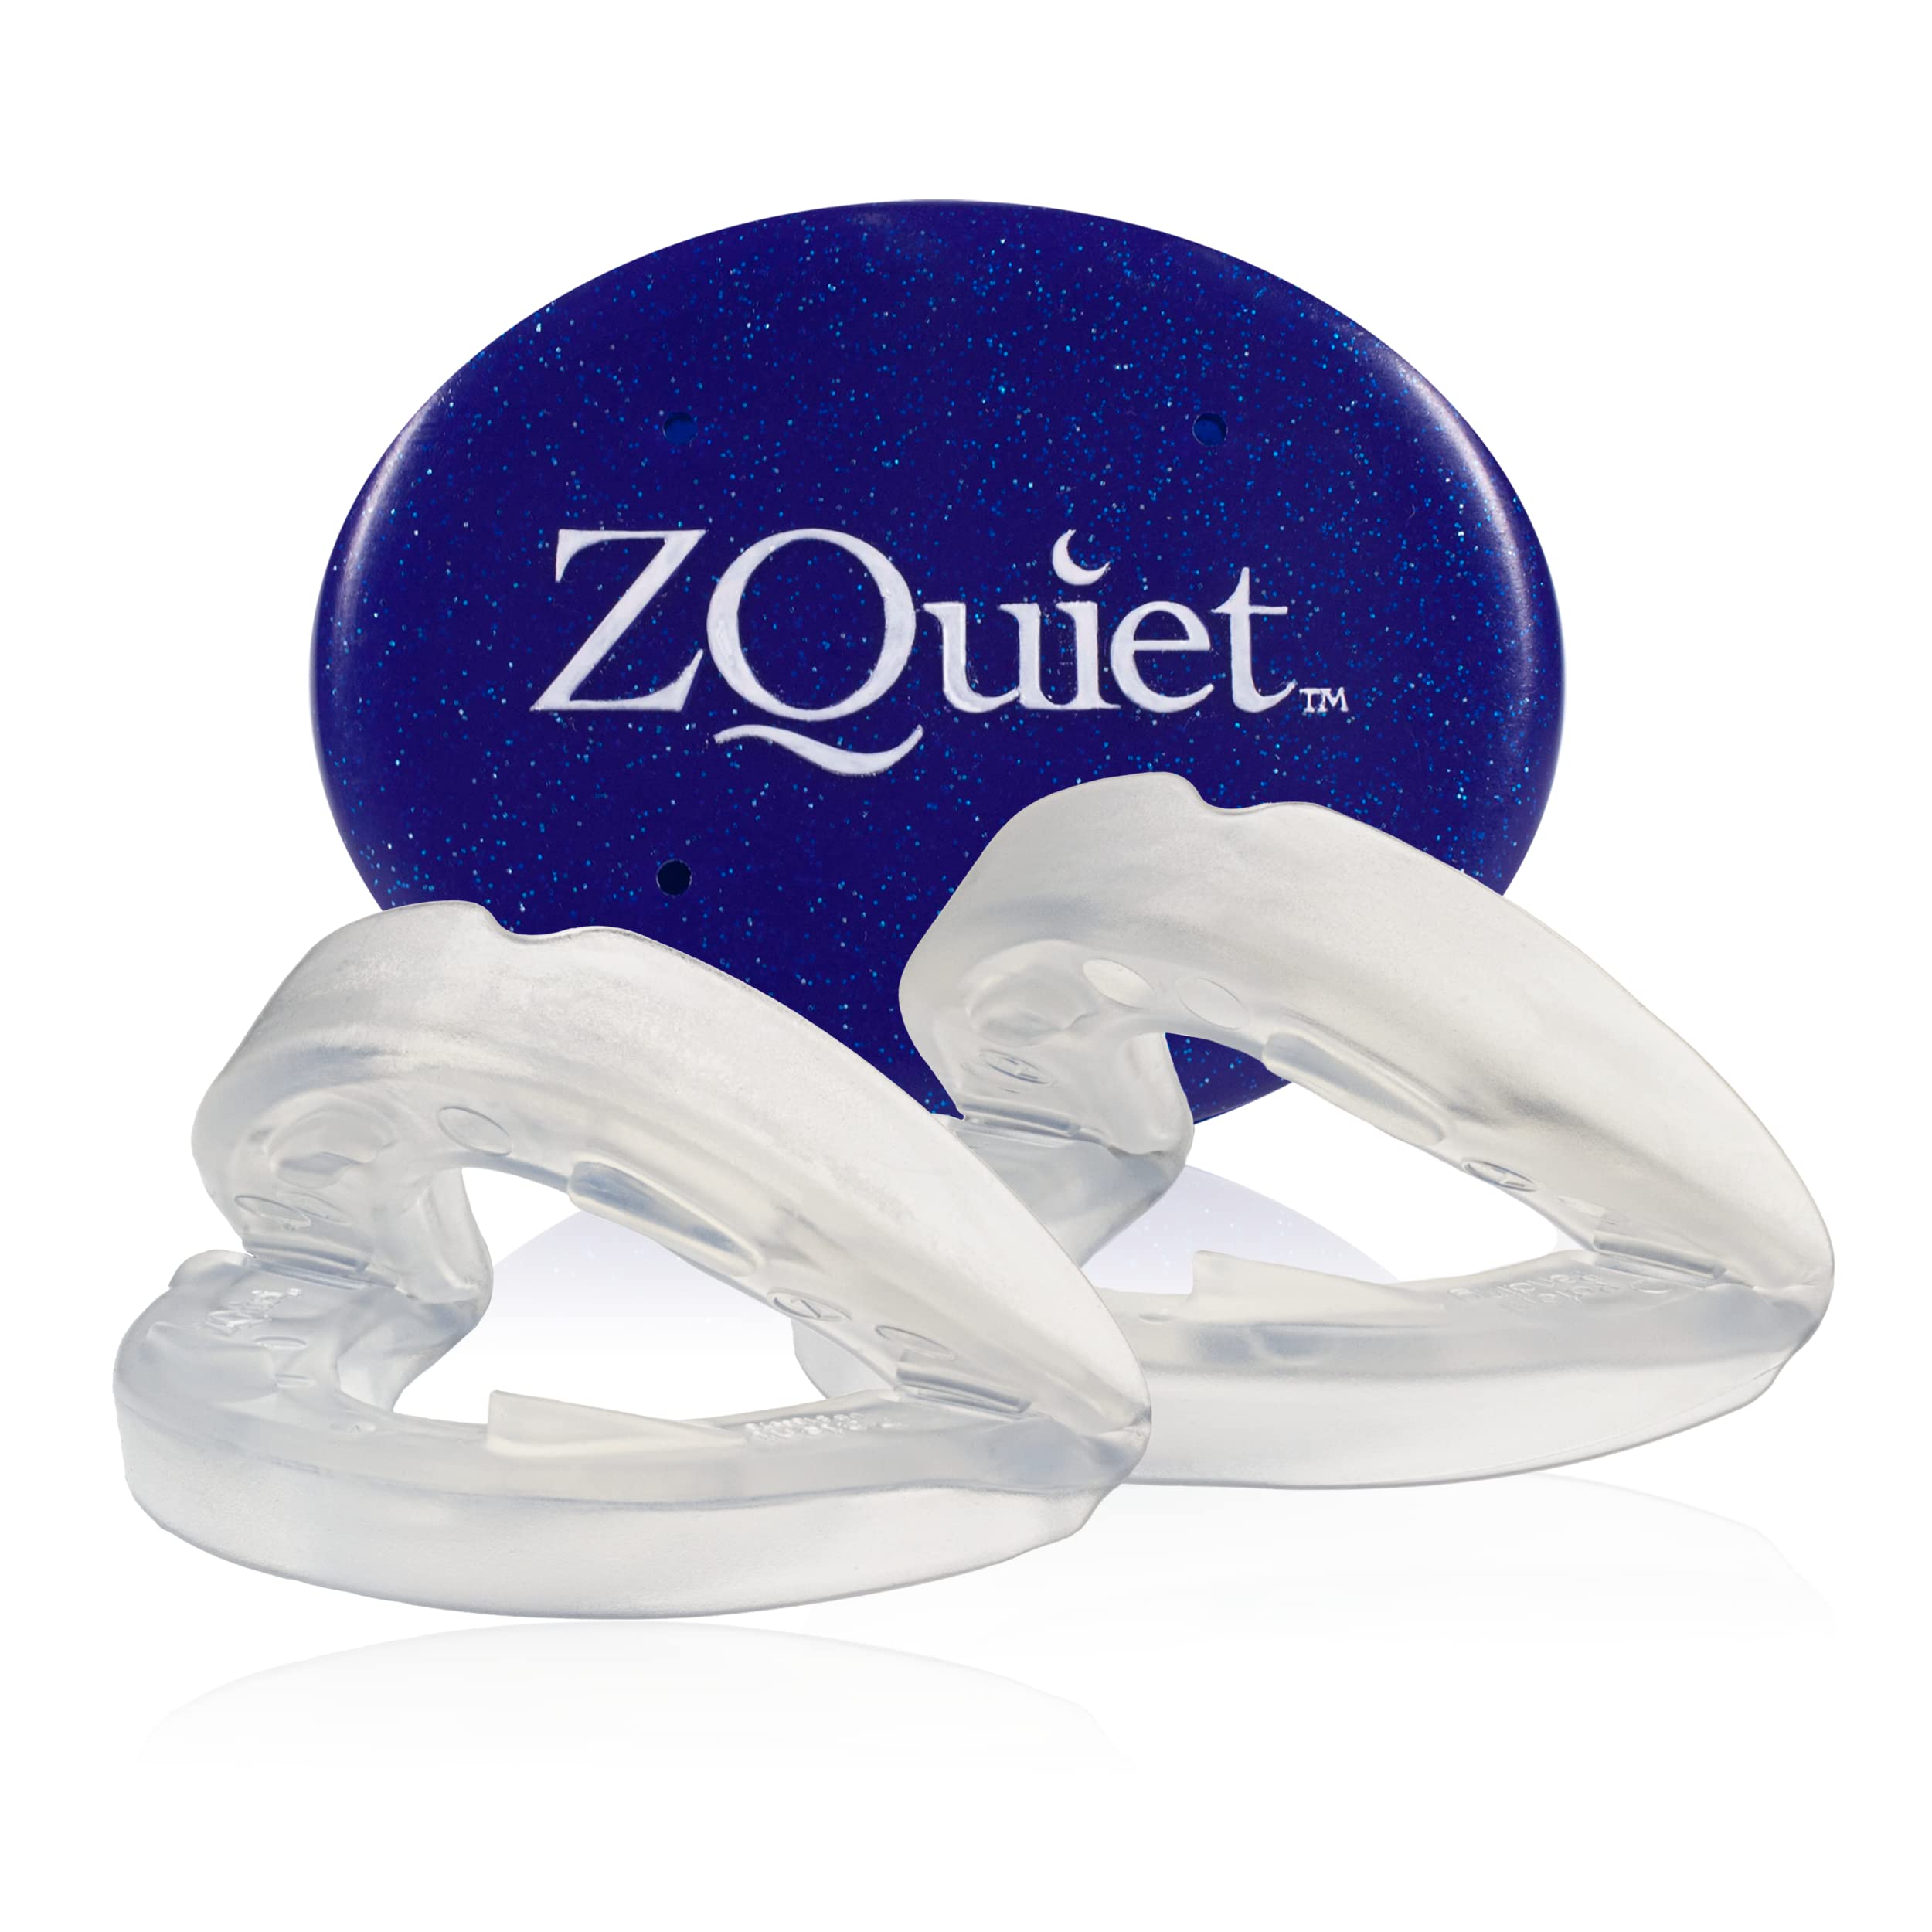 Zquiet Anti Snoring Mouthpiece Solution Introductory Starter Kit Two Sizes Included Made